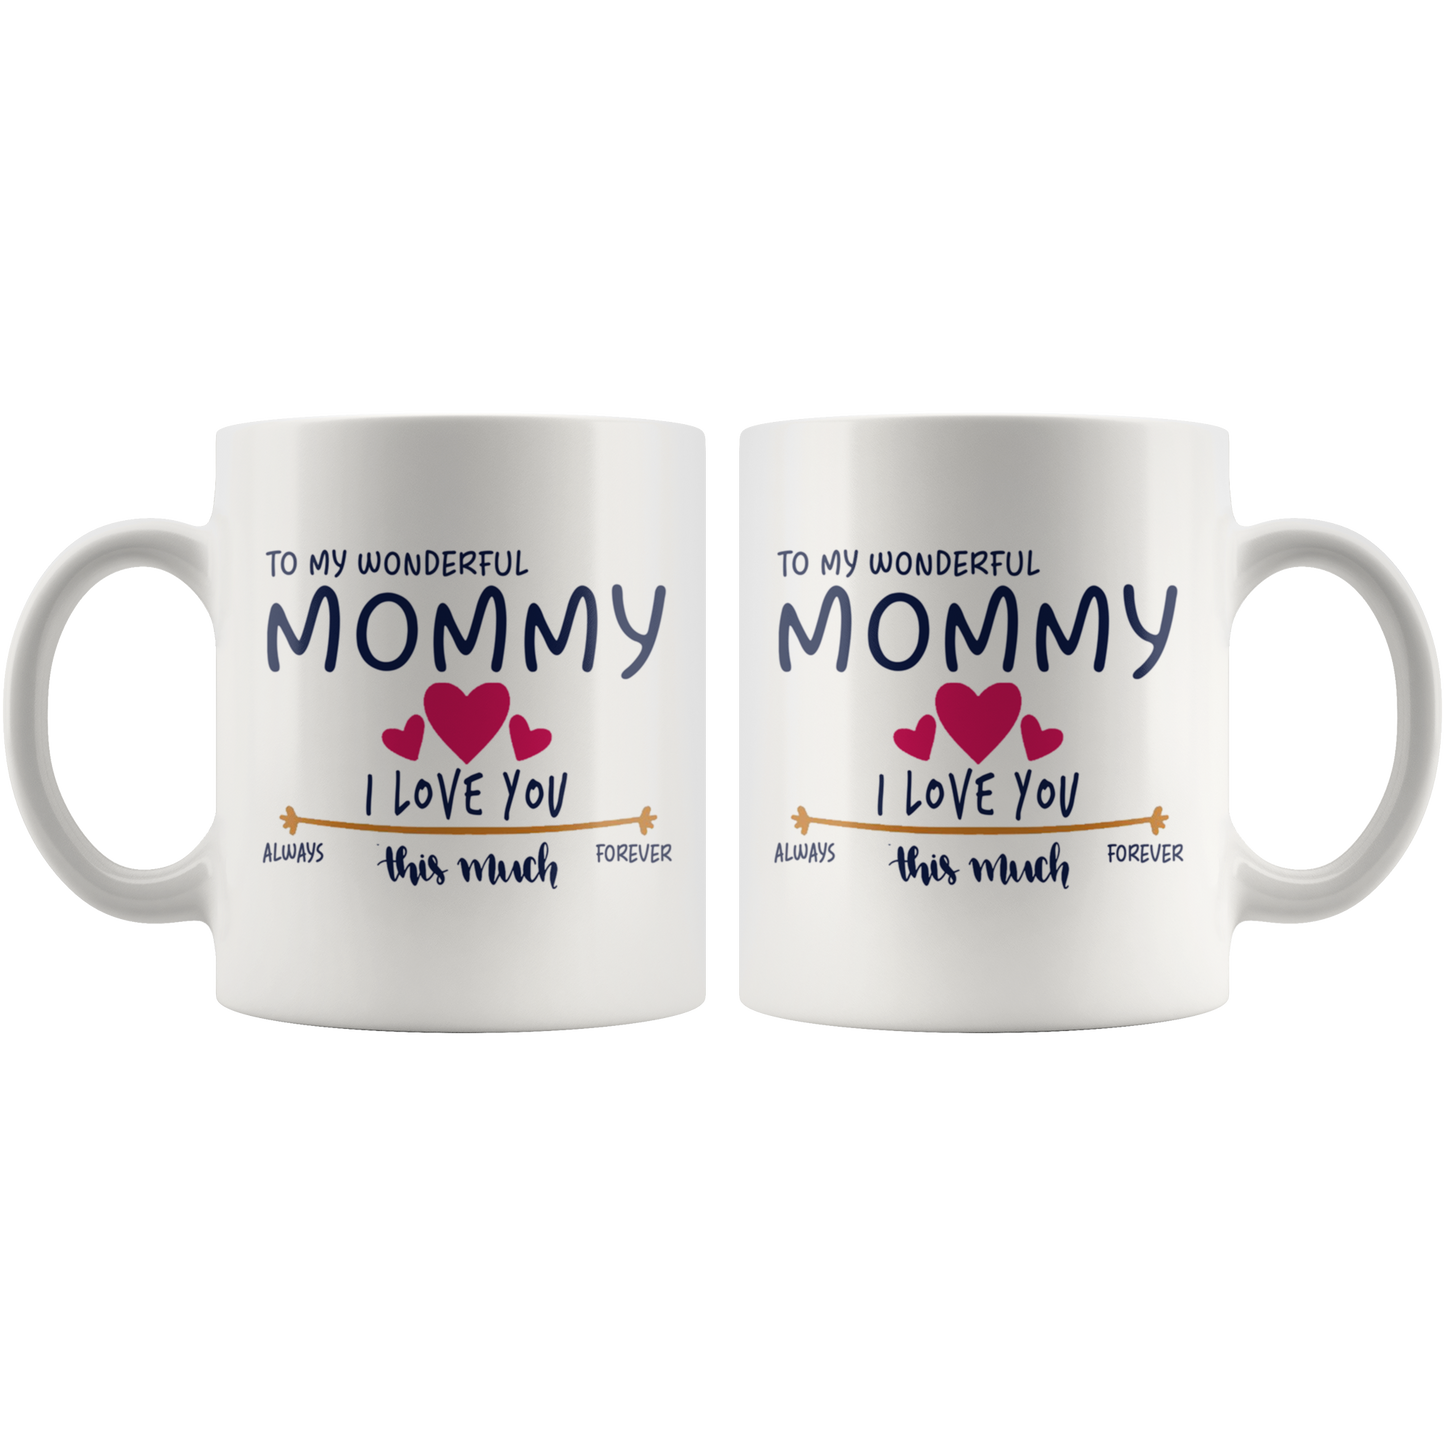 M-20470216-sp-23435 - Mom Day Gifts From Daughter or Son - To My Wonderful Mommy I